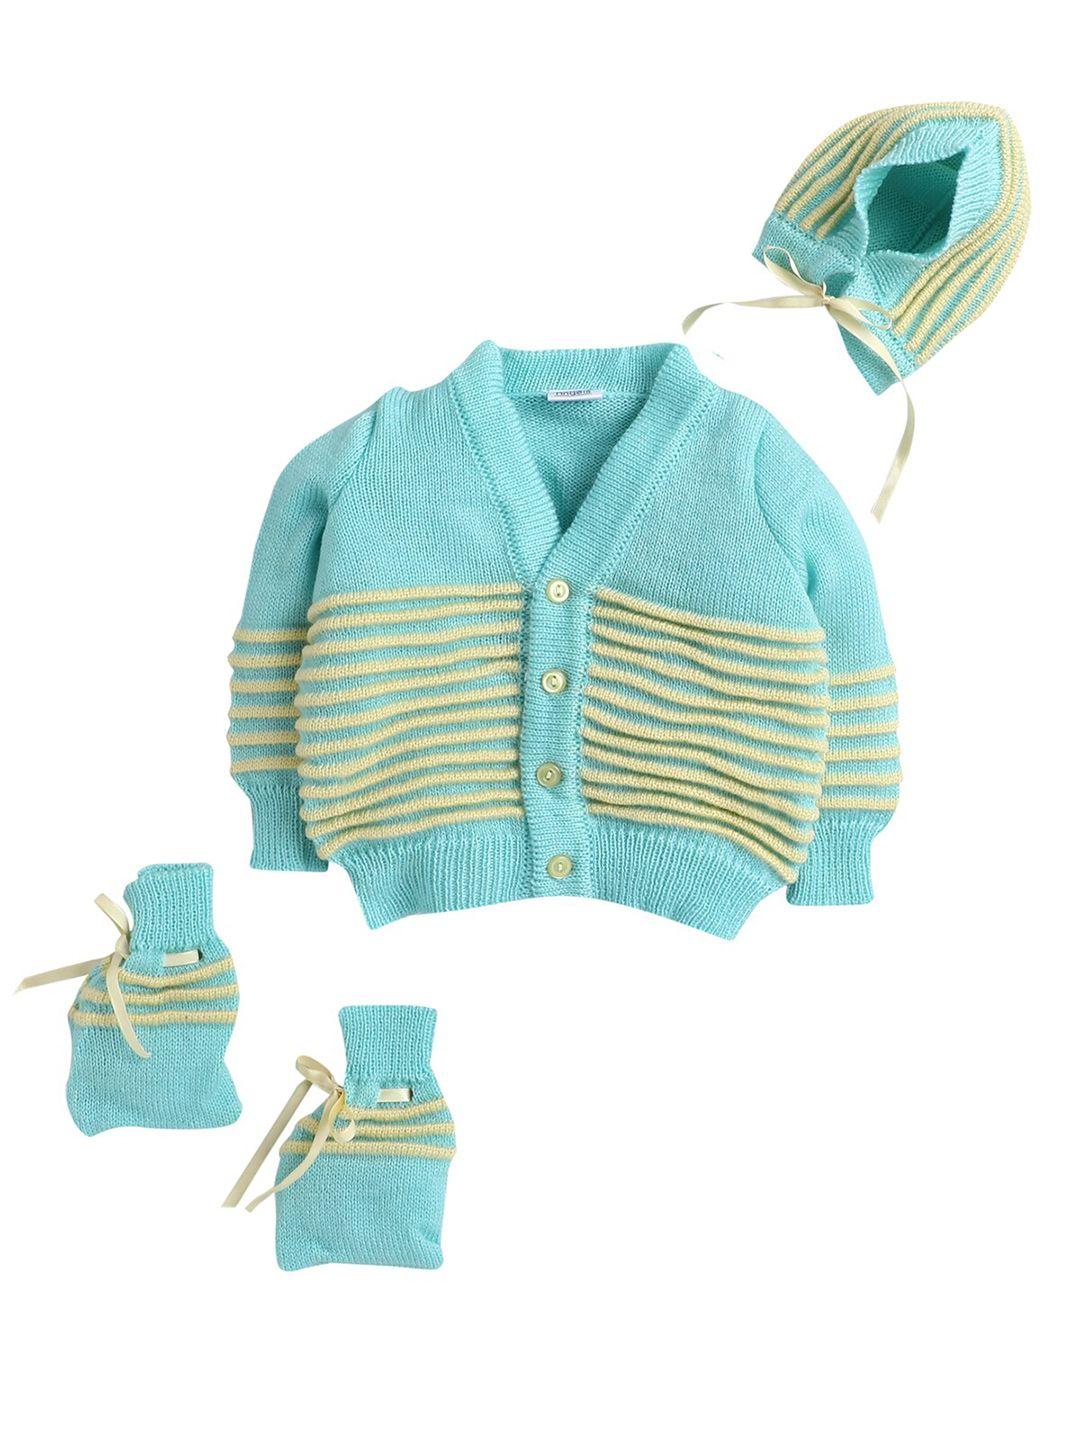 little angels unisex kids green & blue cable knit cardigan matching cap and socks